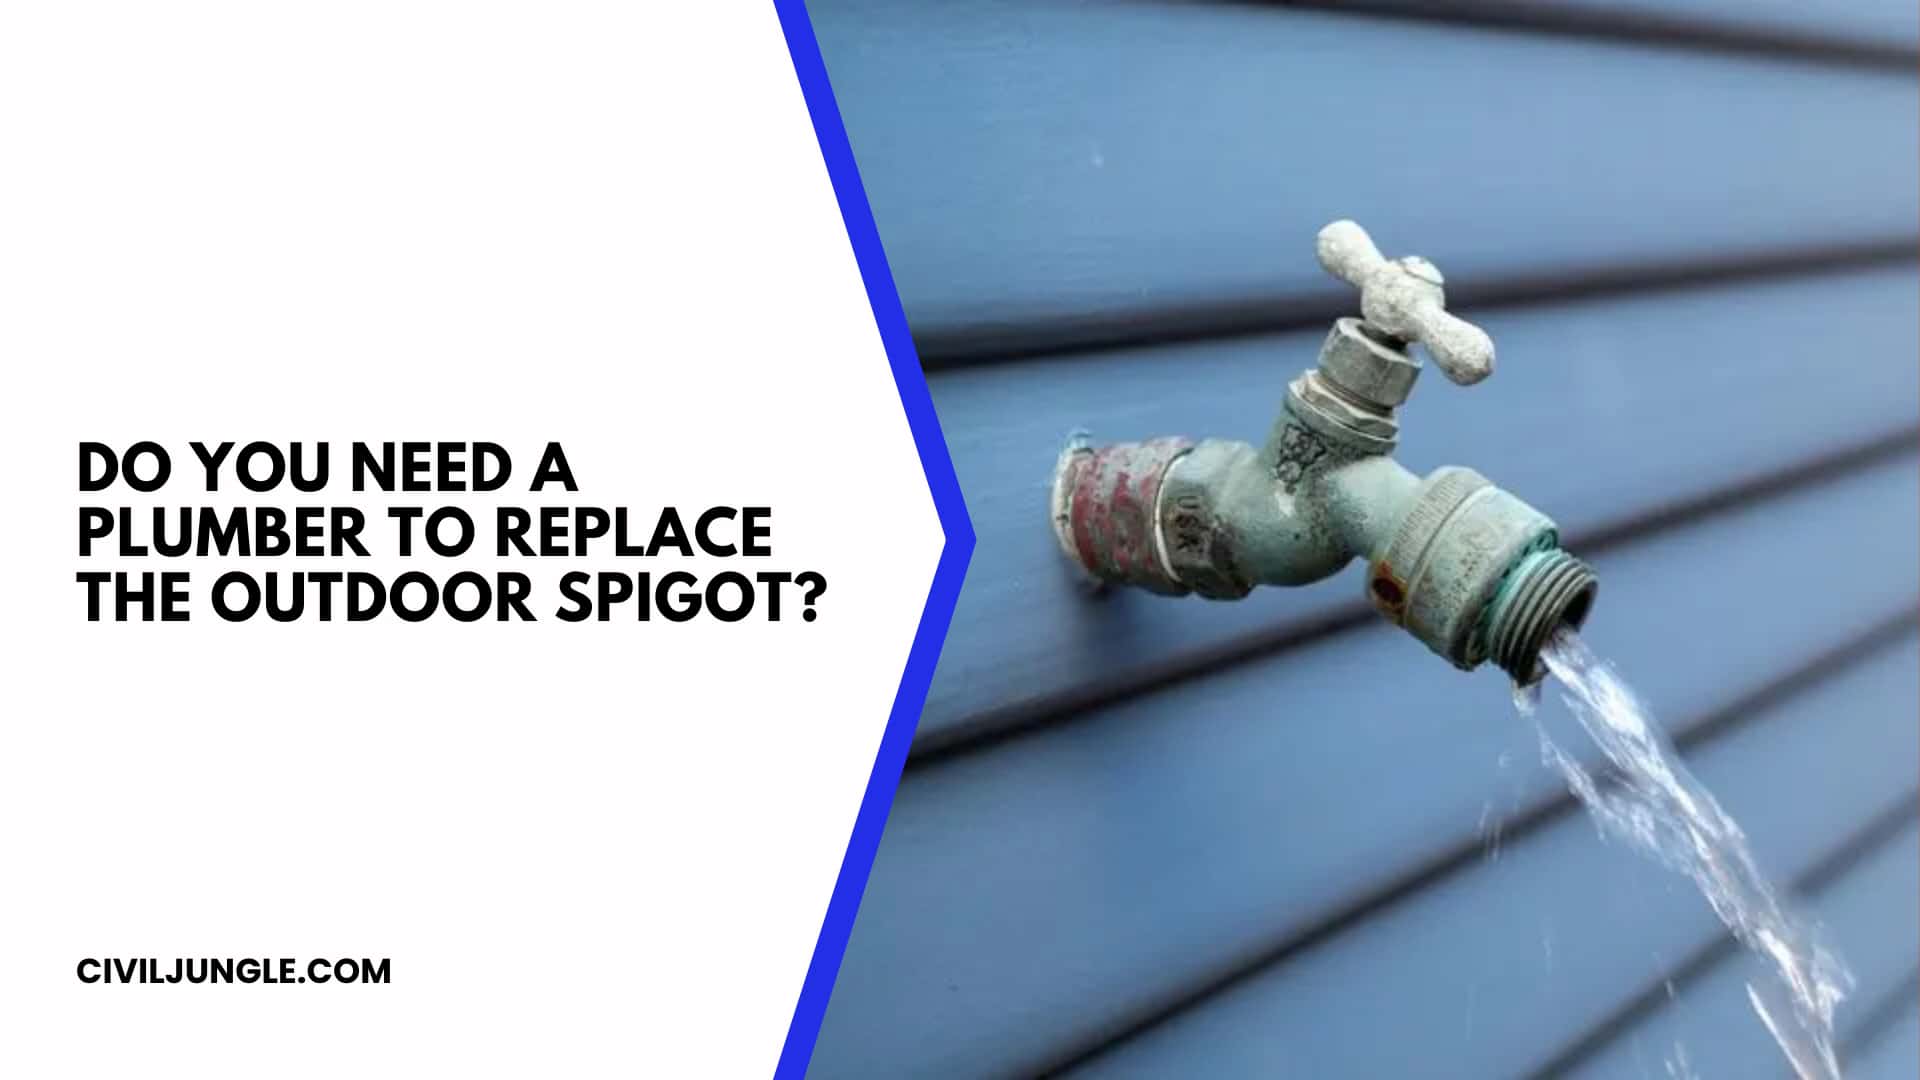 Do You Need a Plumber to Replace the Outdoor Spigot?